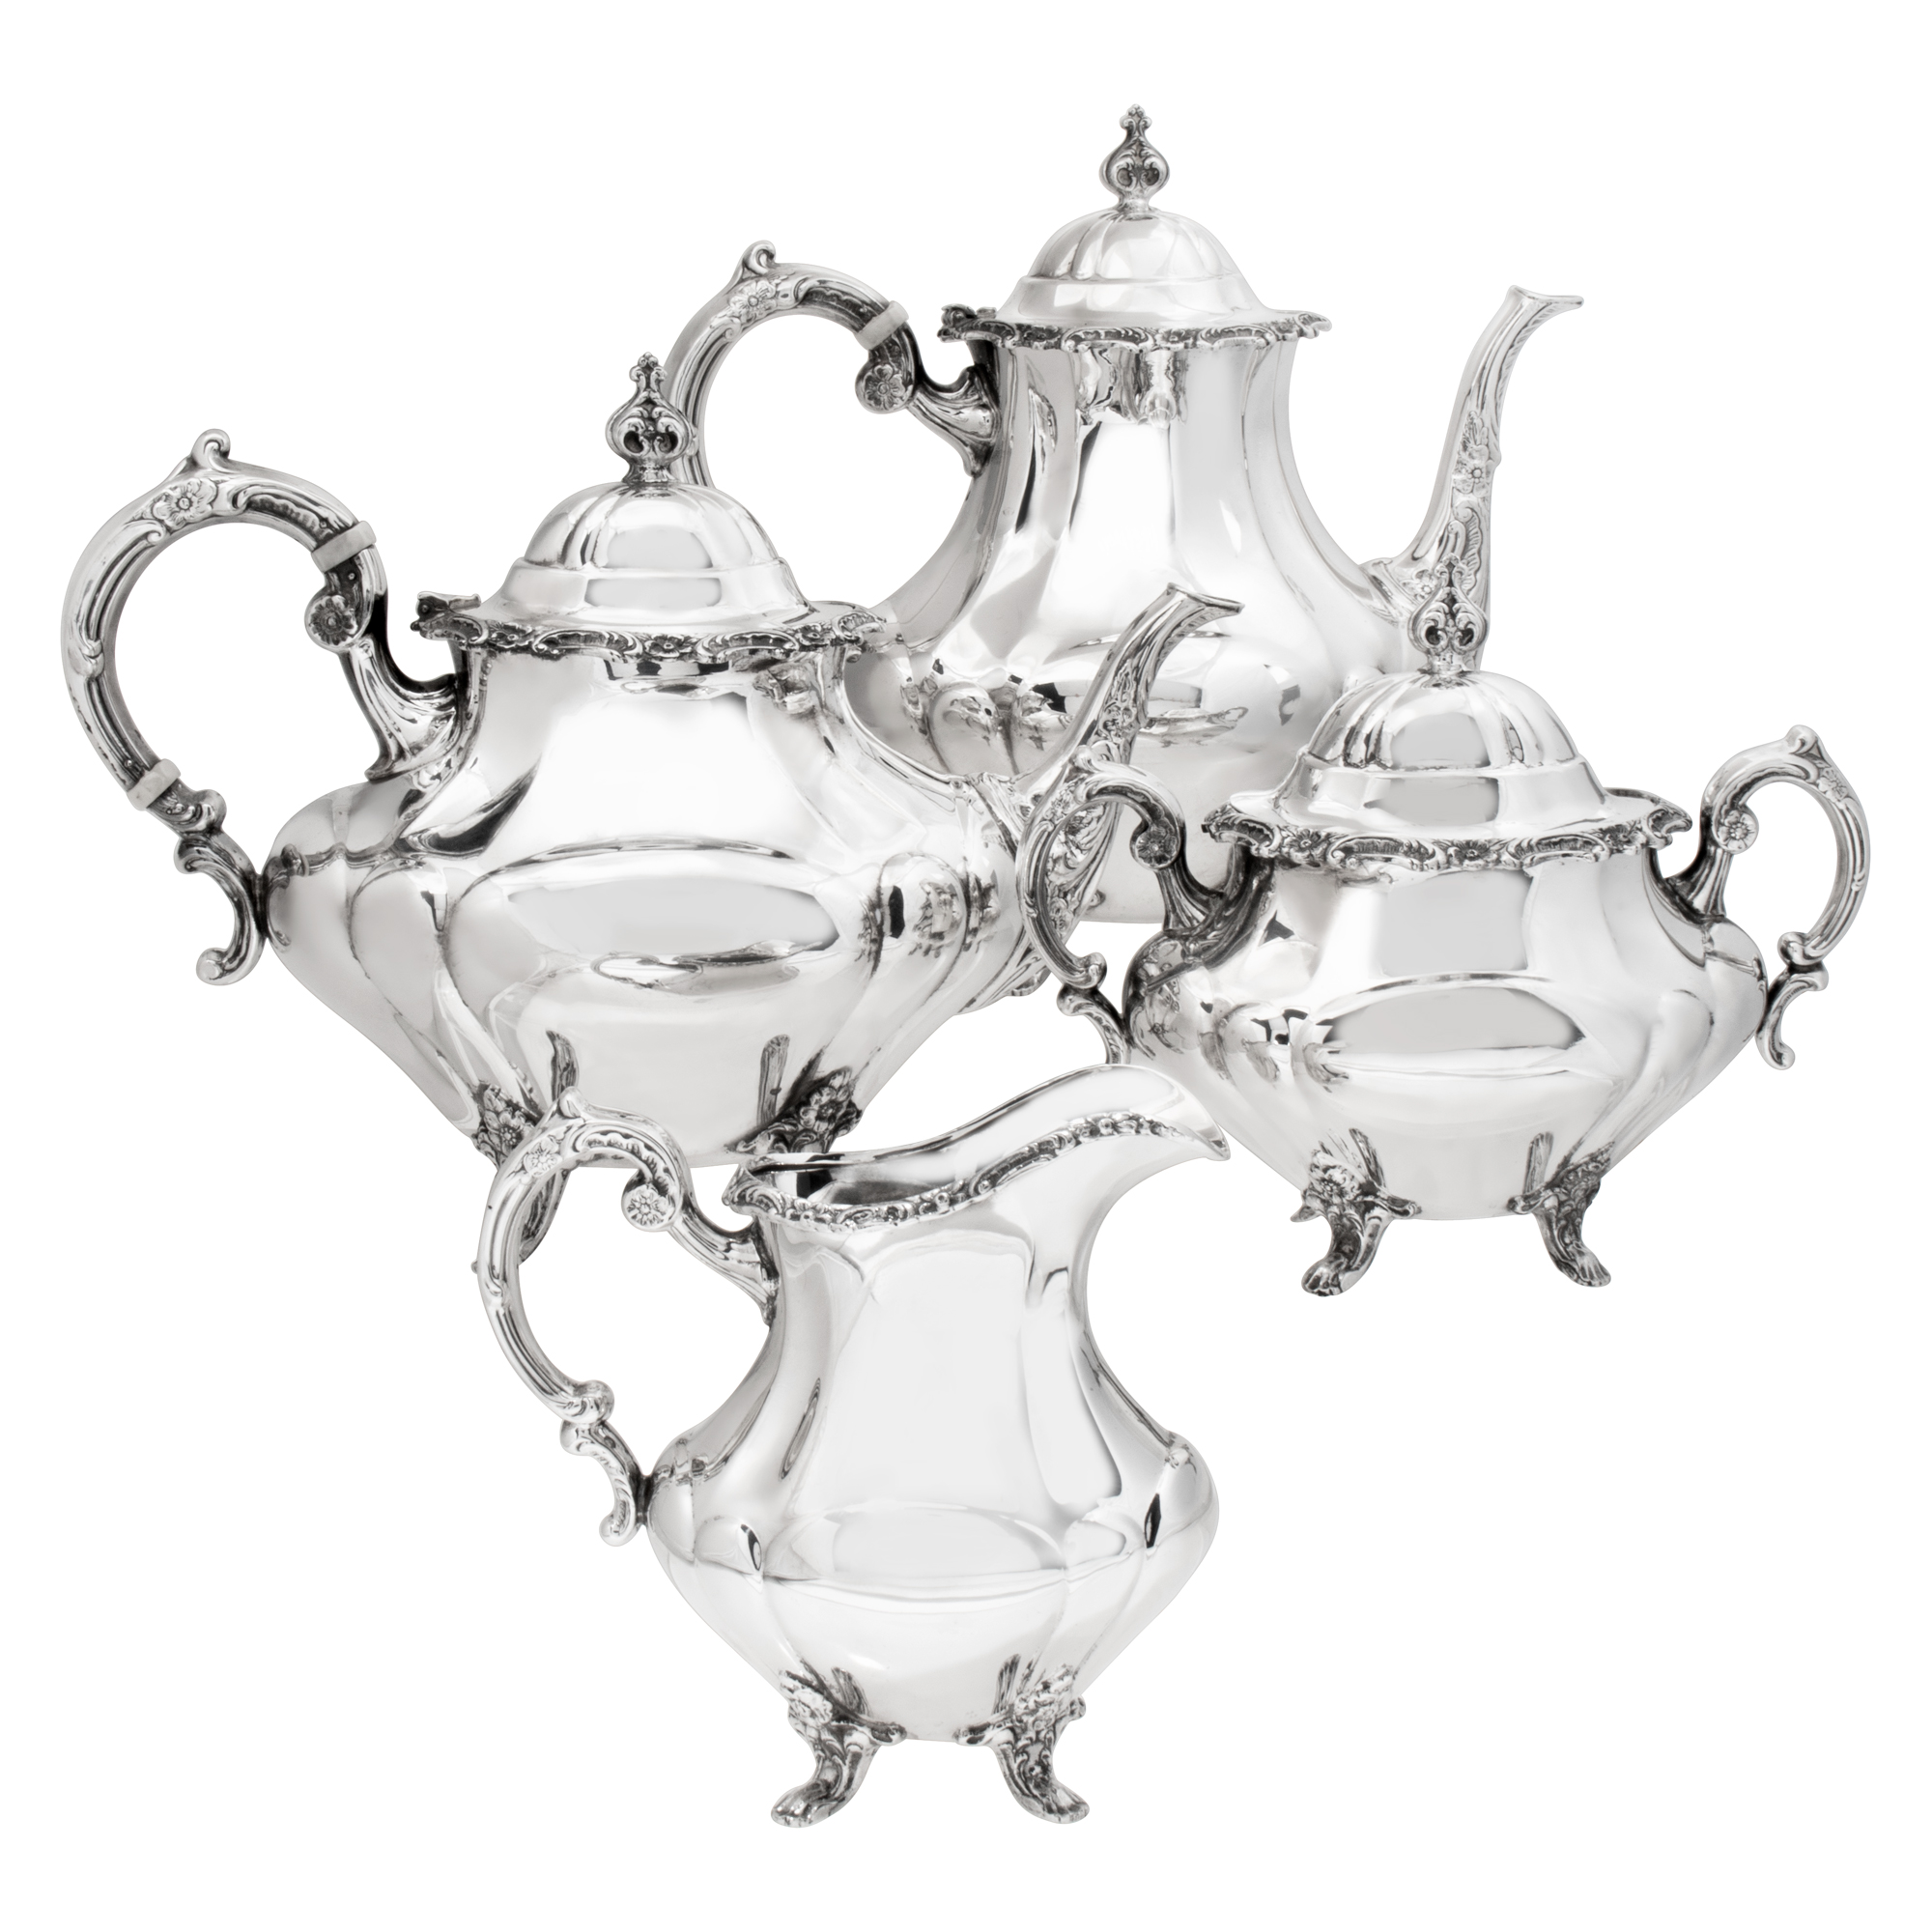 GEORGIAN ROSE 4 pieces sterling silver tea/coffee set. Patented in 1941 by the Reed & Barton Sterling Silver company. 2295 grams (74 ounces troy) sterling silver.